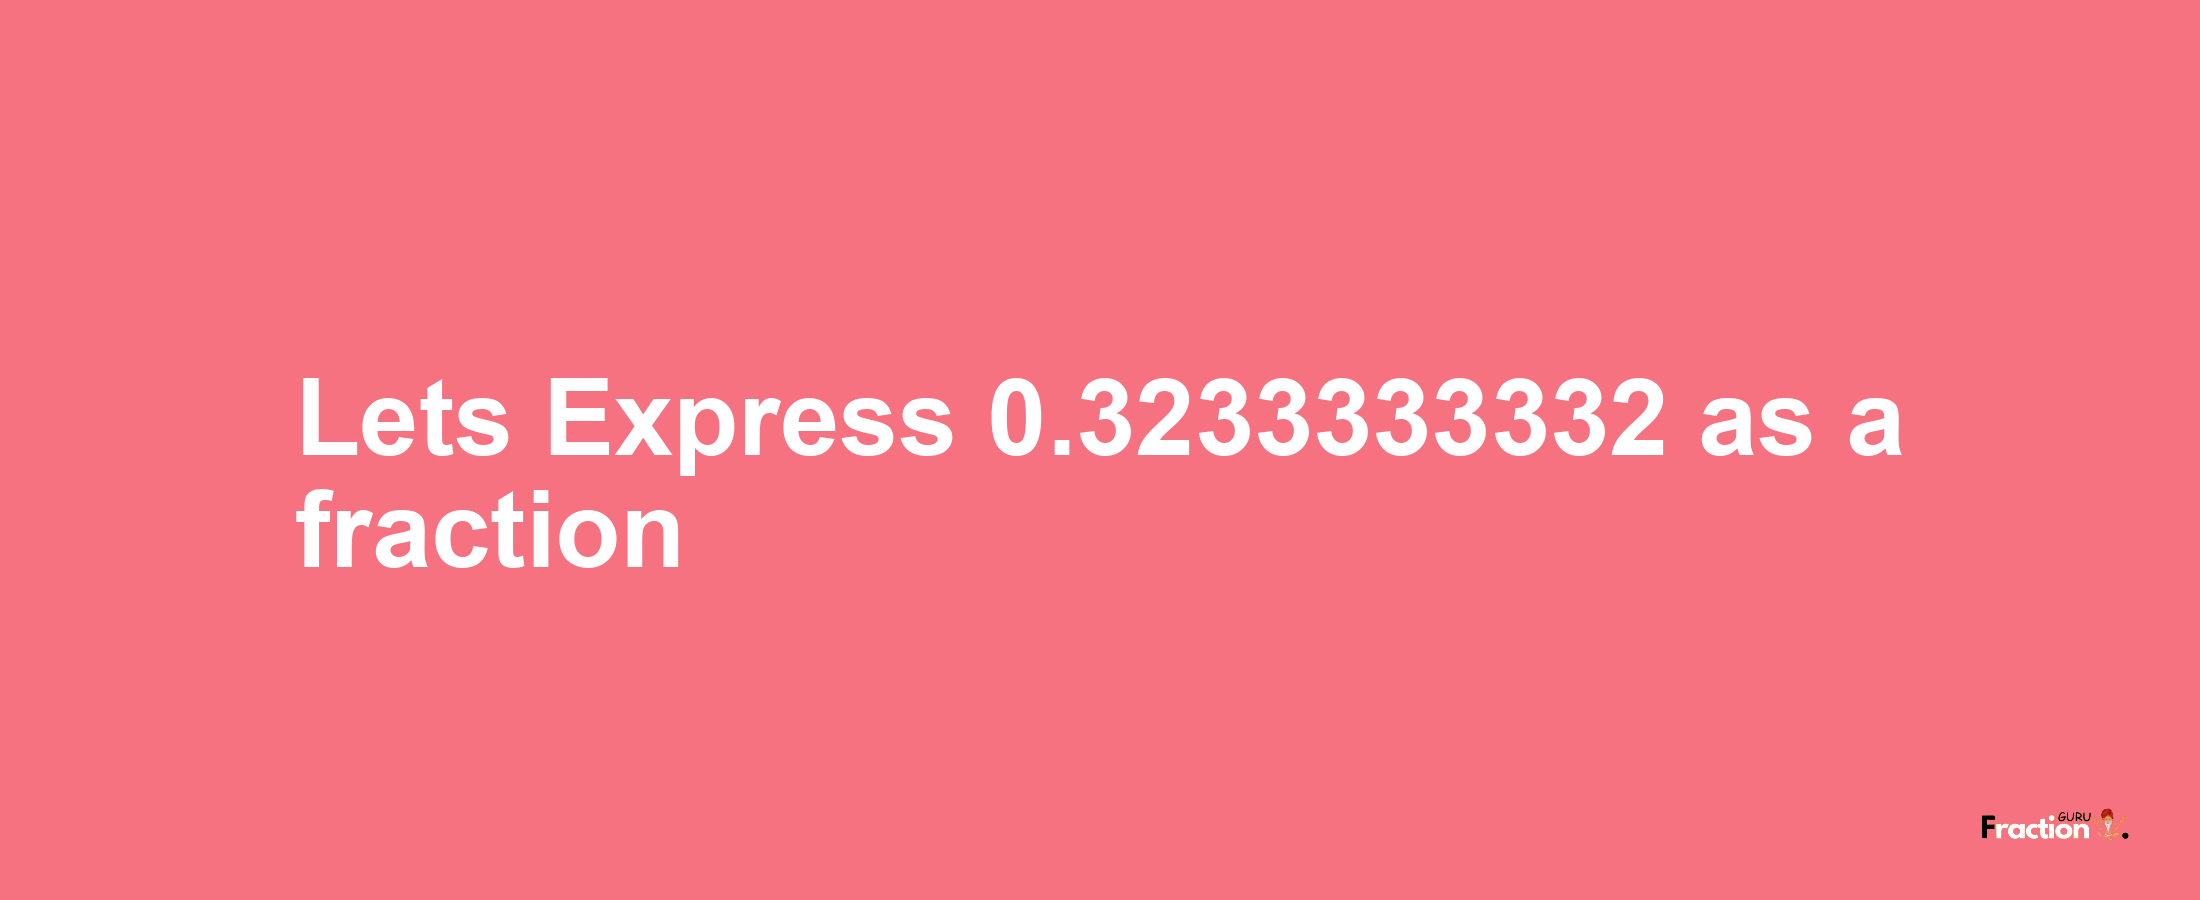 Lets Express 0.3233333332 as afraction